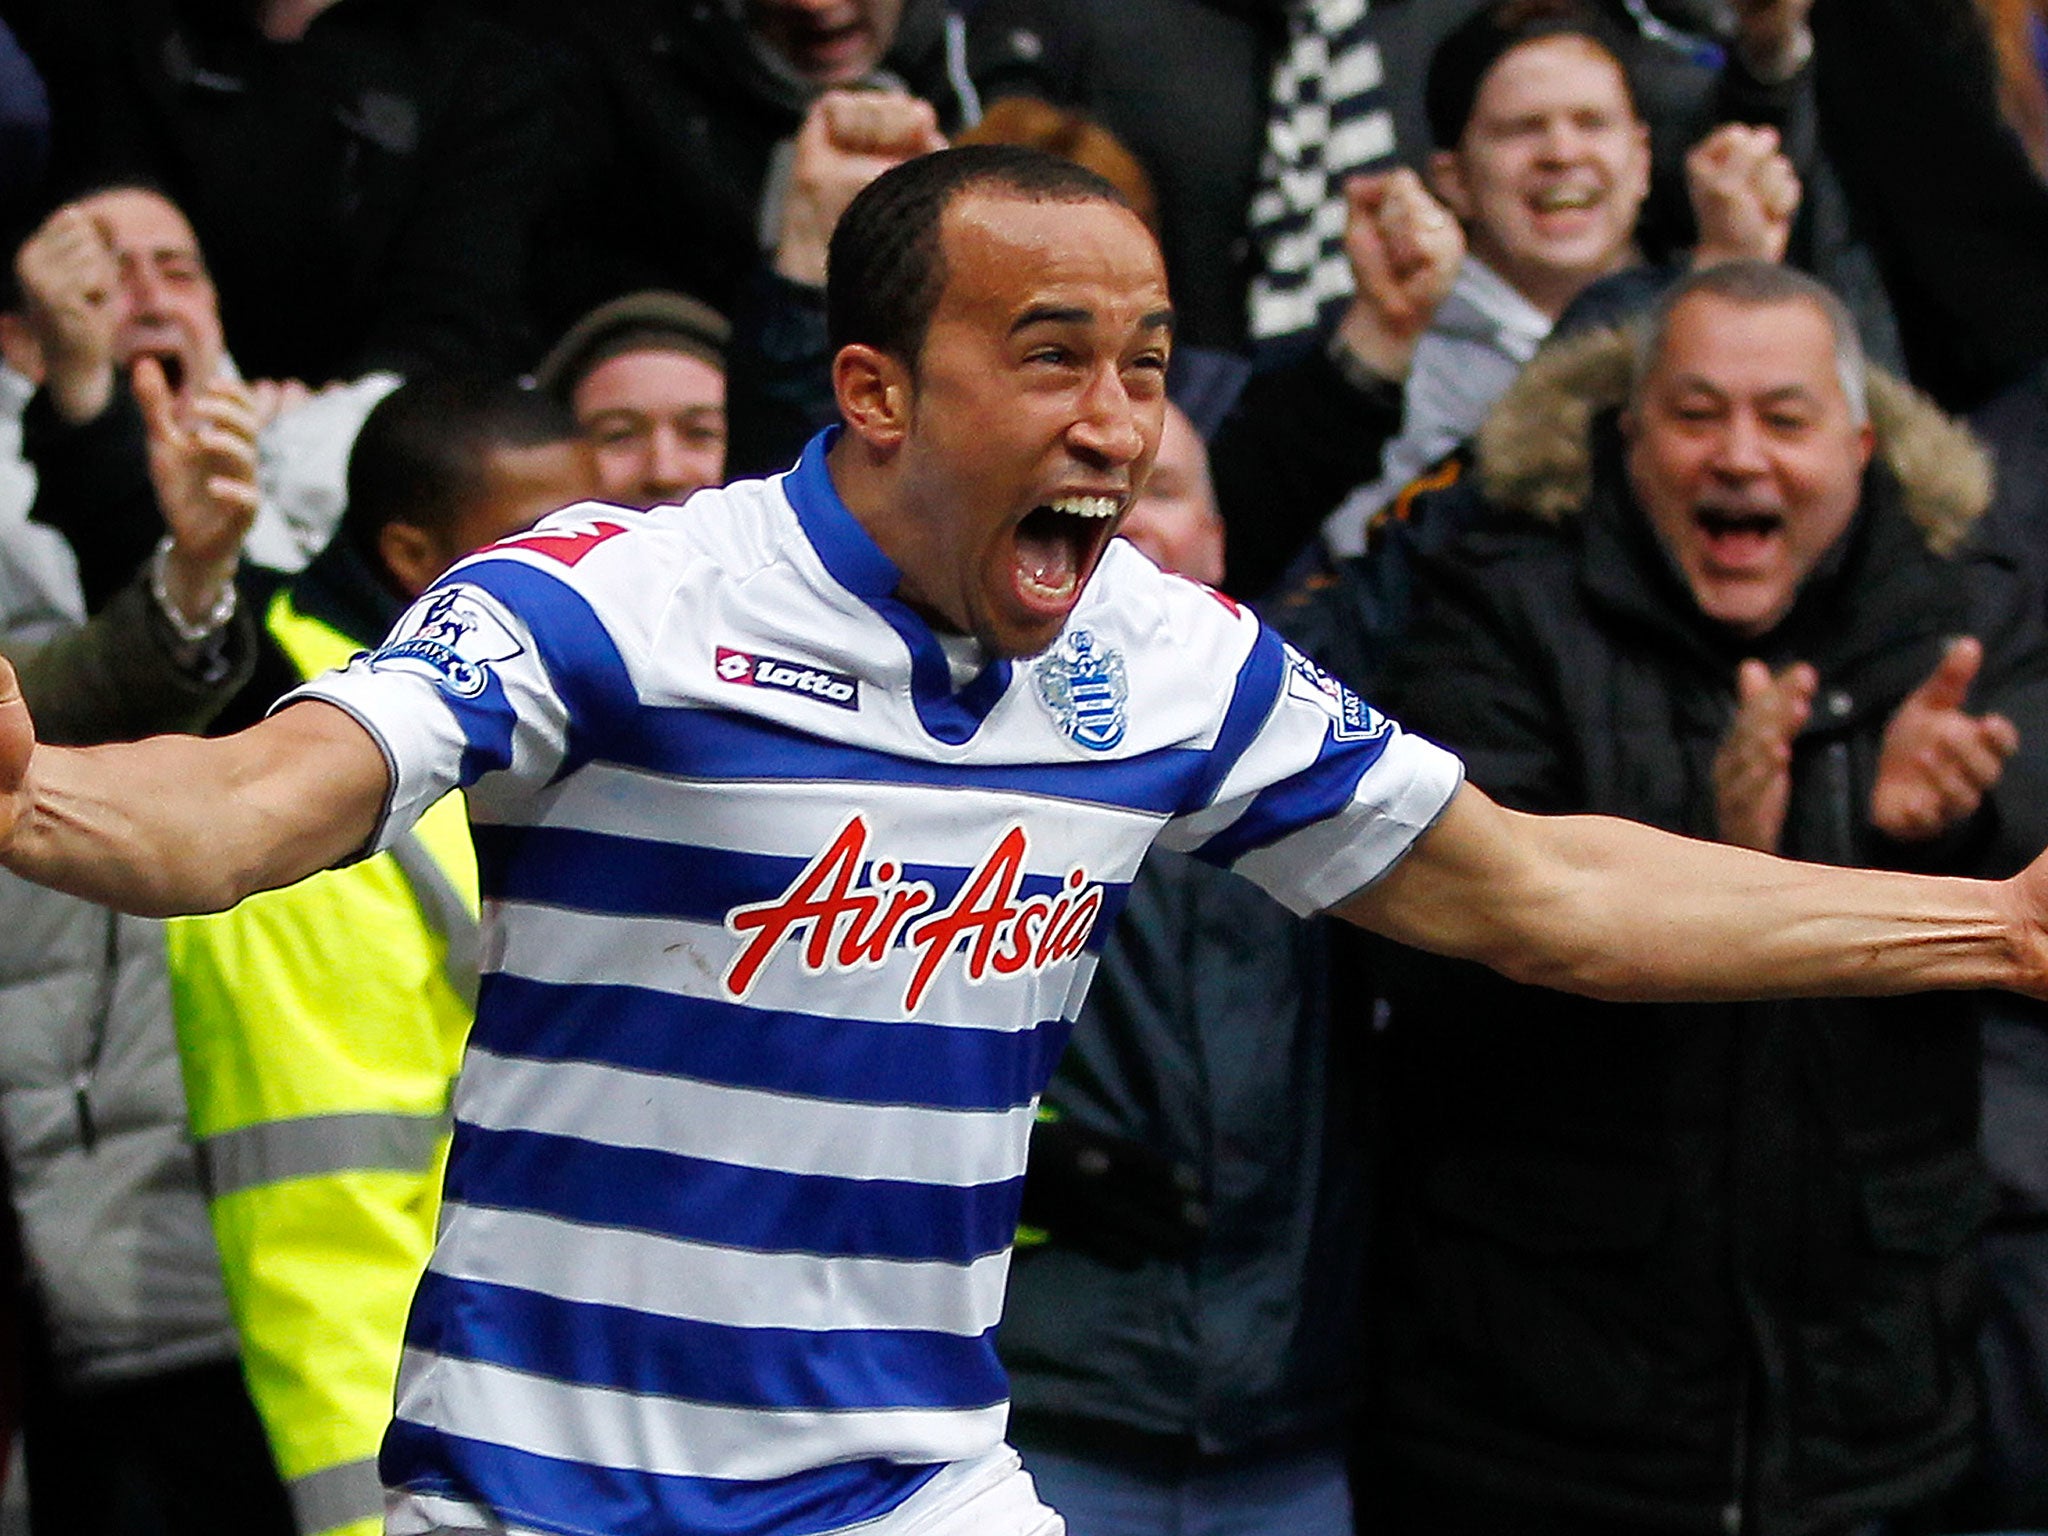 Queens Park Rangers English midfielder Andros Townsend celebrates scoring his team's second goal